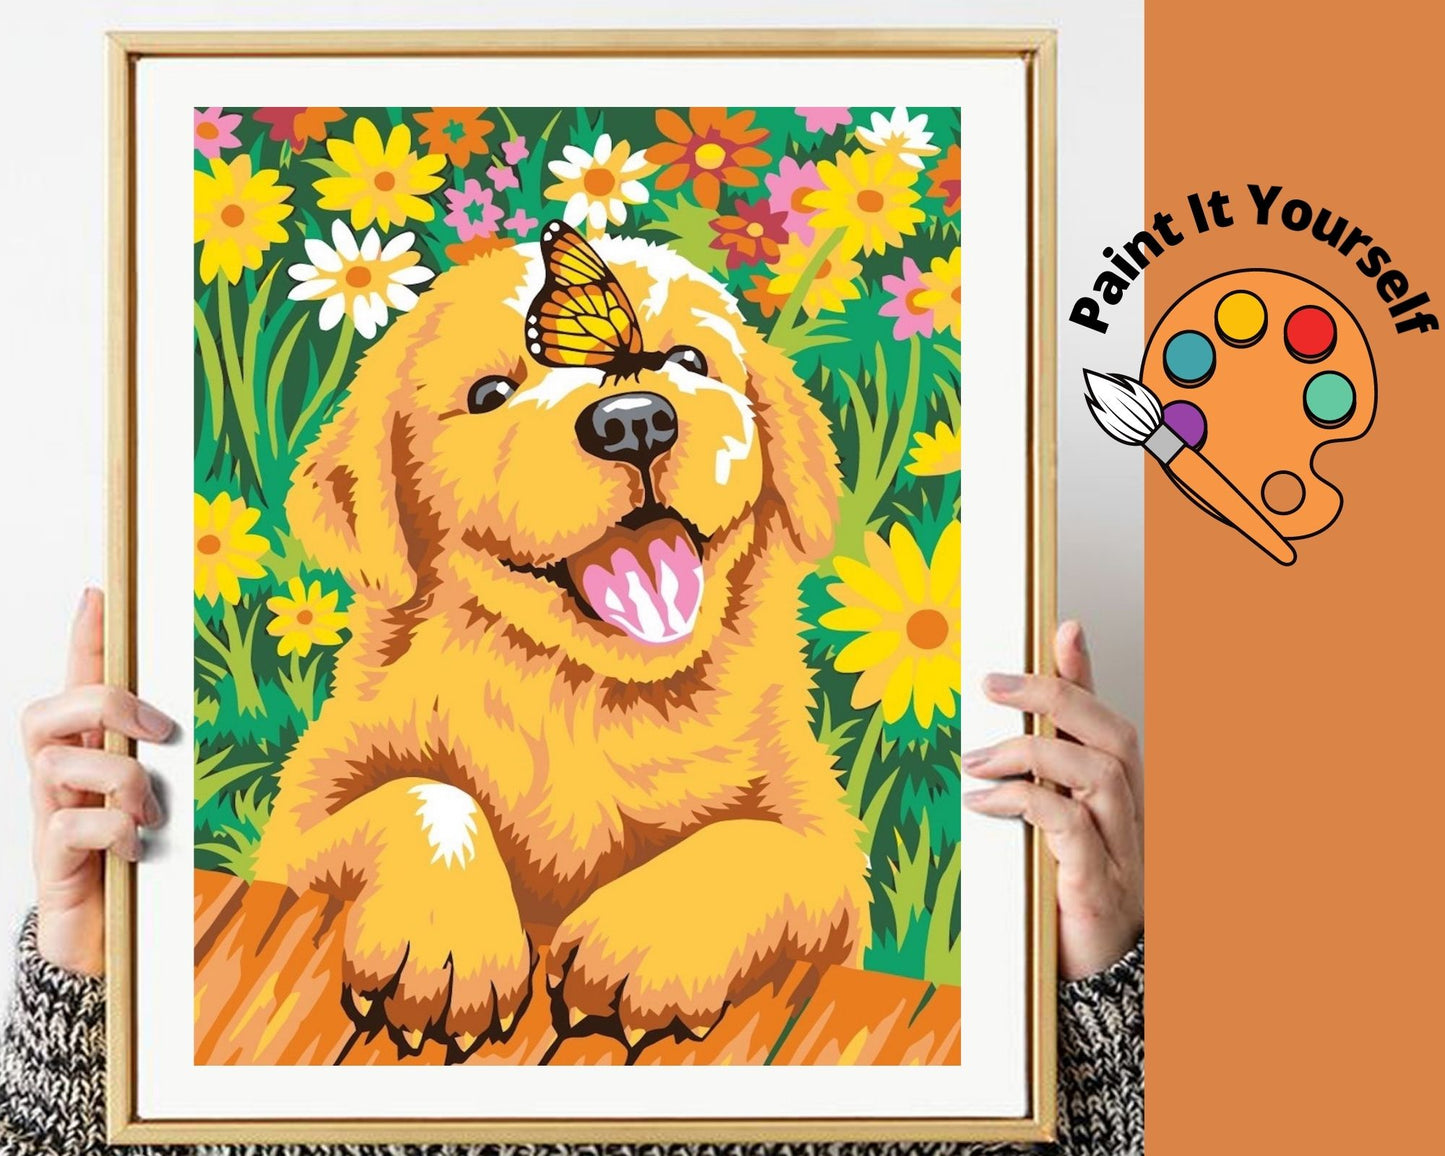 CUTE GOLDEN RETRIEVER IN THE GARDEN - DIY Adult Paint By Number Kit